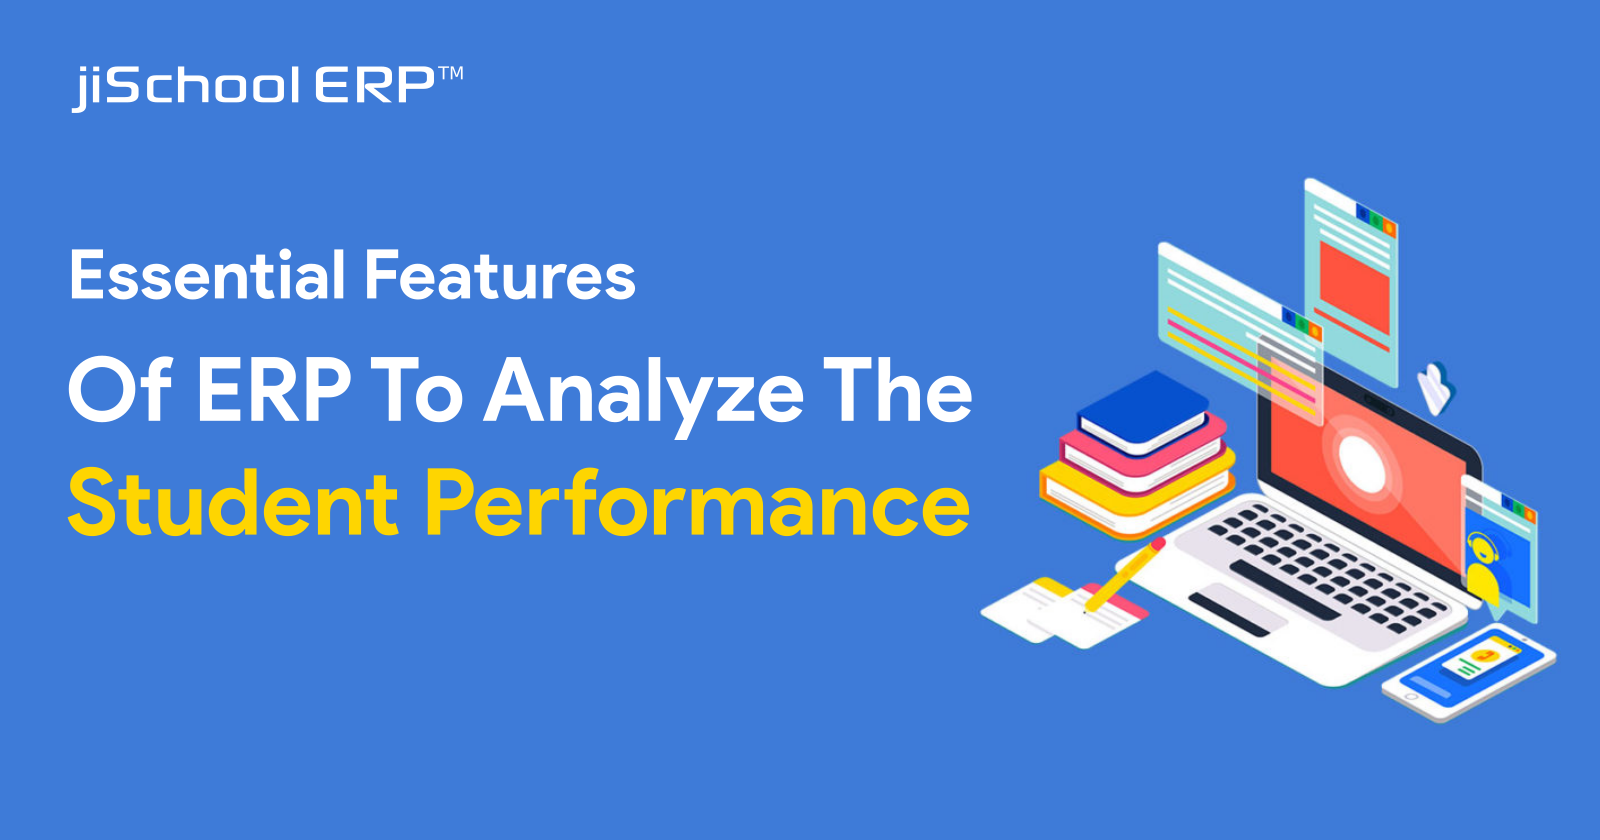 Essential Features of ERP to Analyze the Student Performance